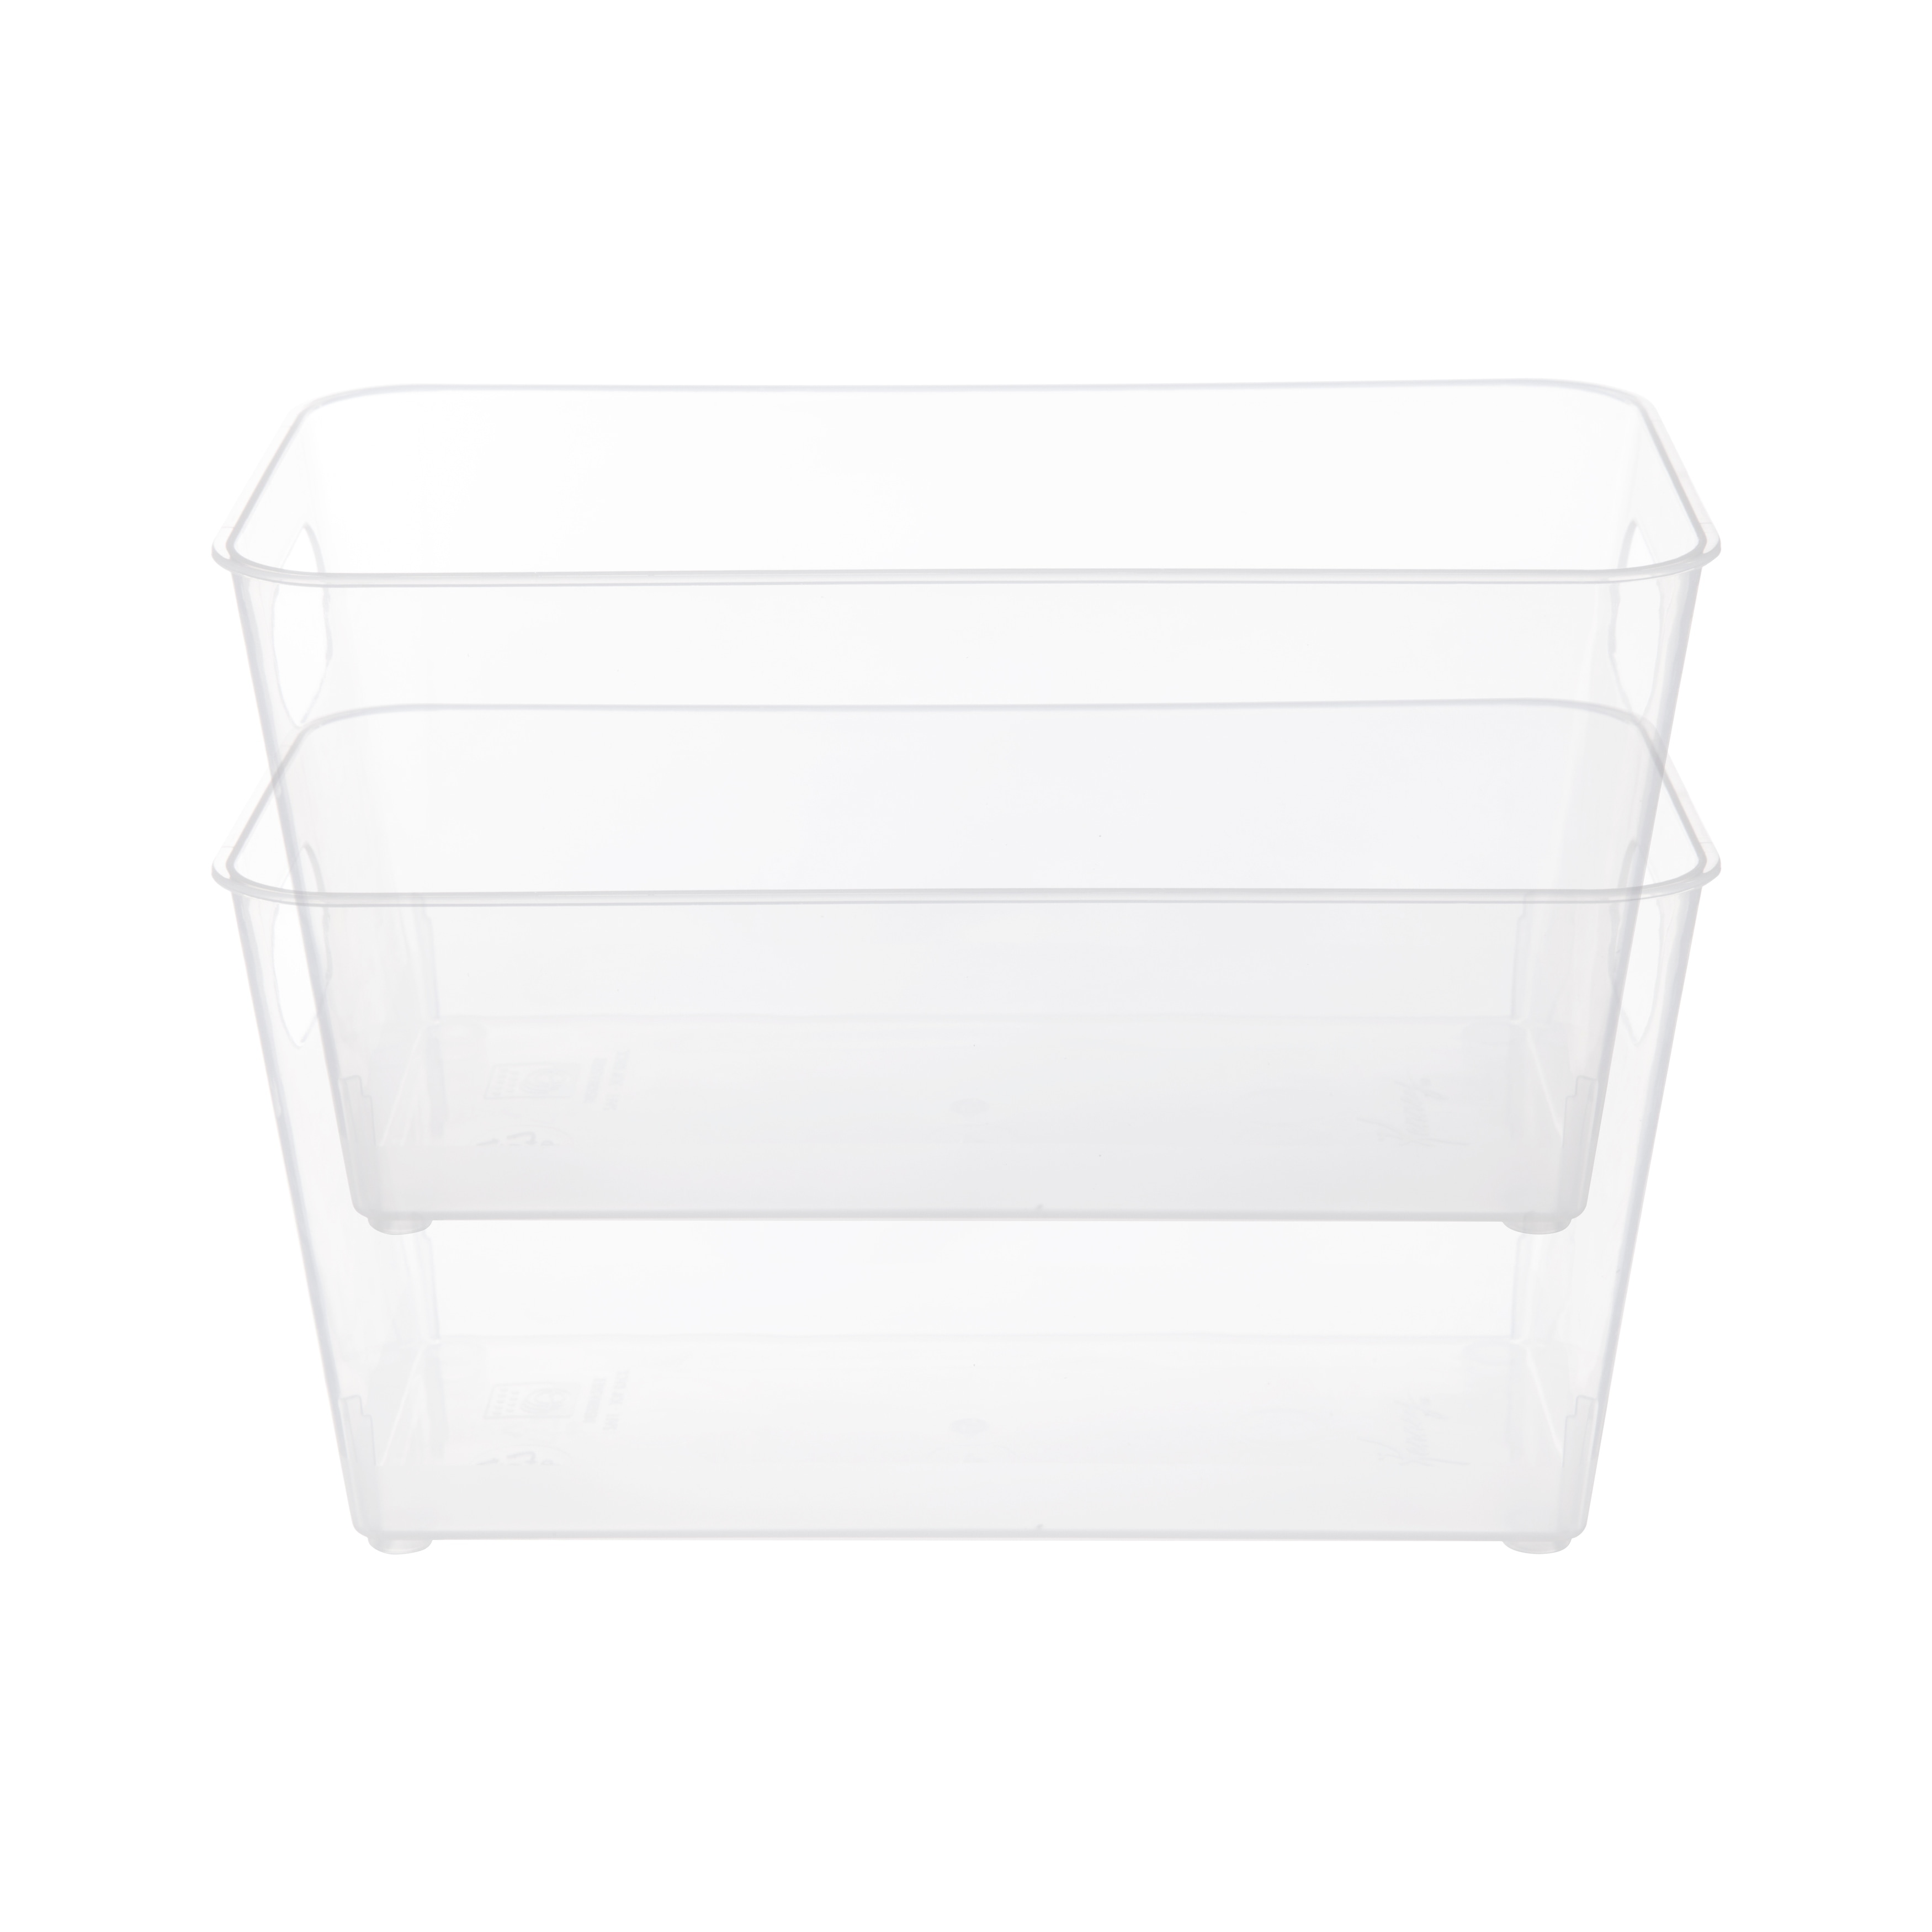 https://ak1.ostkcdn.com/images/products/is/images/direct/92ca58bd96954ab34de25cd8c79e15bf03f1576a/Kenney-Storage-Made-Simple-Organizer-Bin-with-Handles%2C-2-pack%2C-Clear.jpg